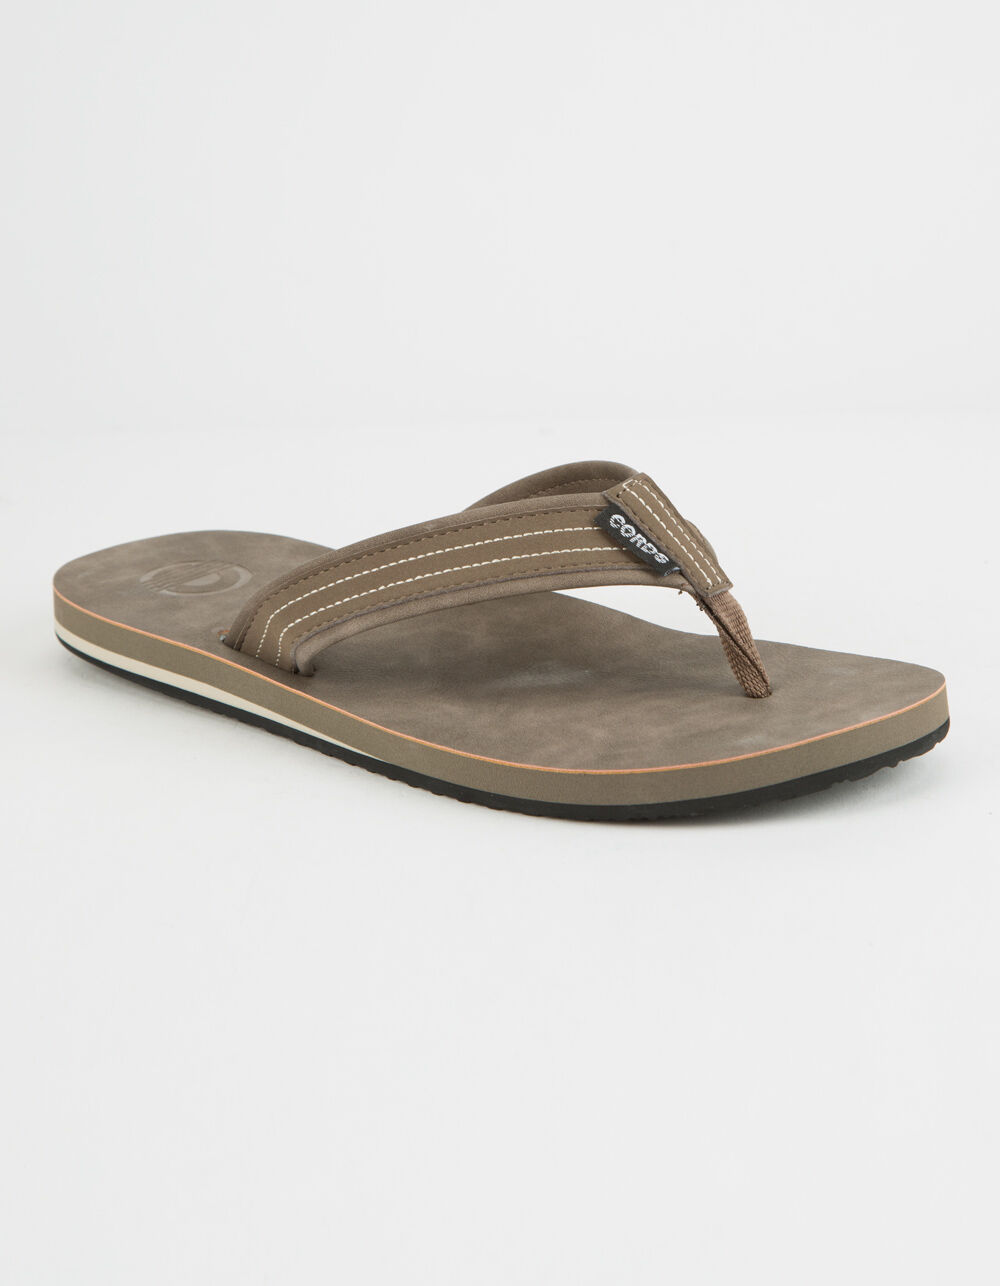 CORDS Commando 2 Brown Mens Sandals image number 0